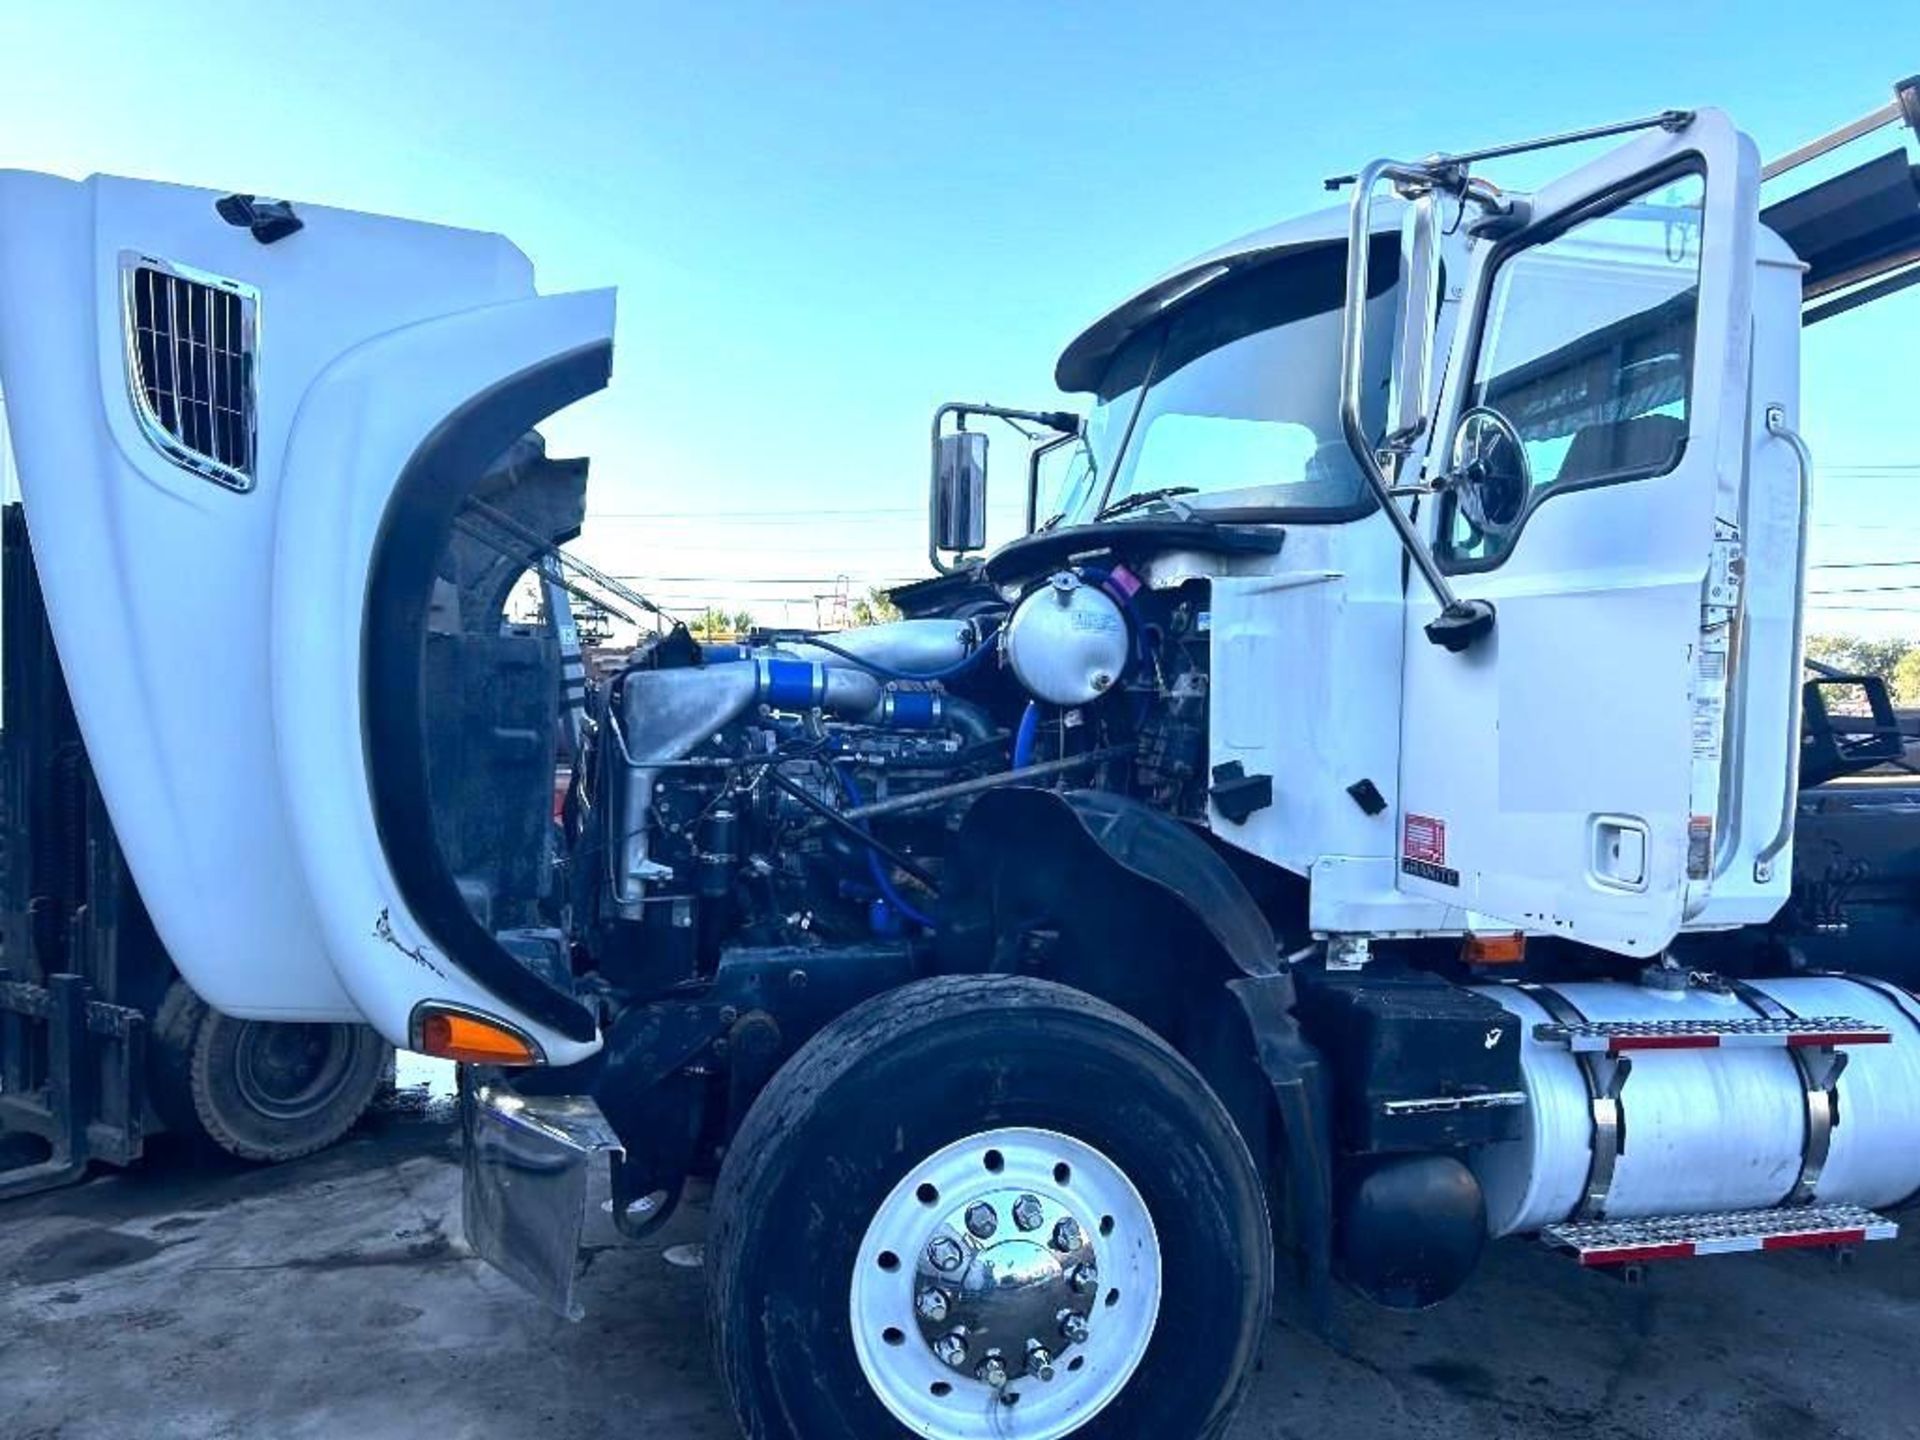 2006 MACK CV713 GRANITE ROLL OFF TRUCK, DIESEL, GVWR RECENTLY REPLACED TRANSMISSION / AC SYSTEM &... - Image 9 of 14